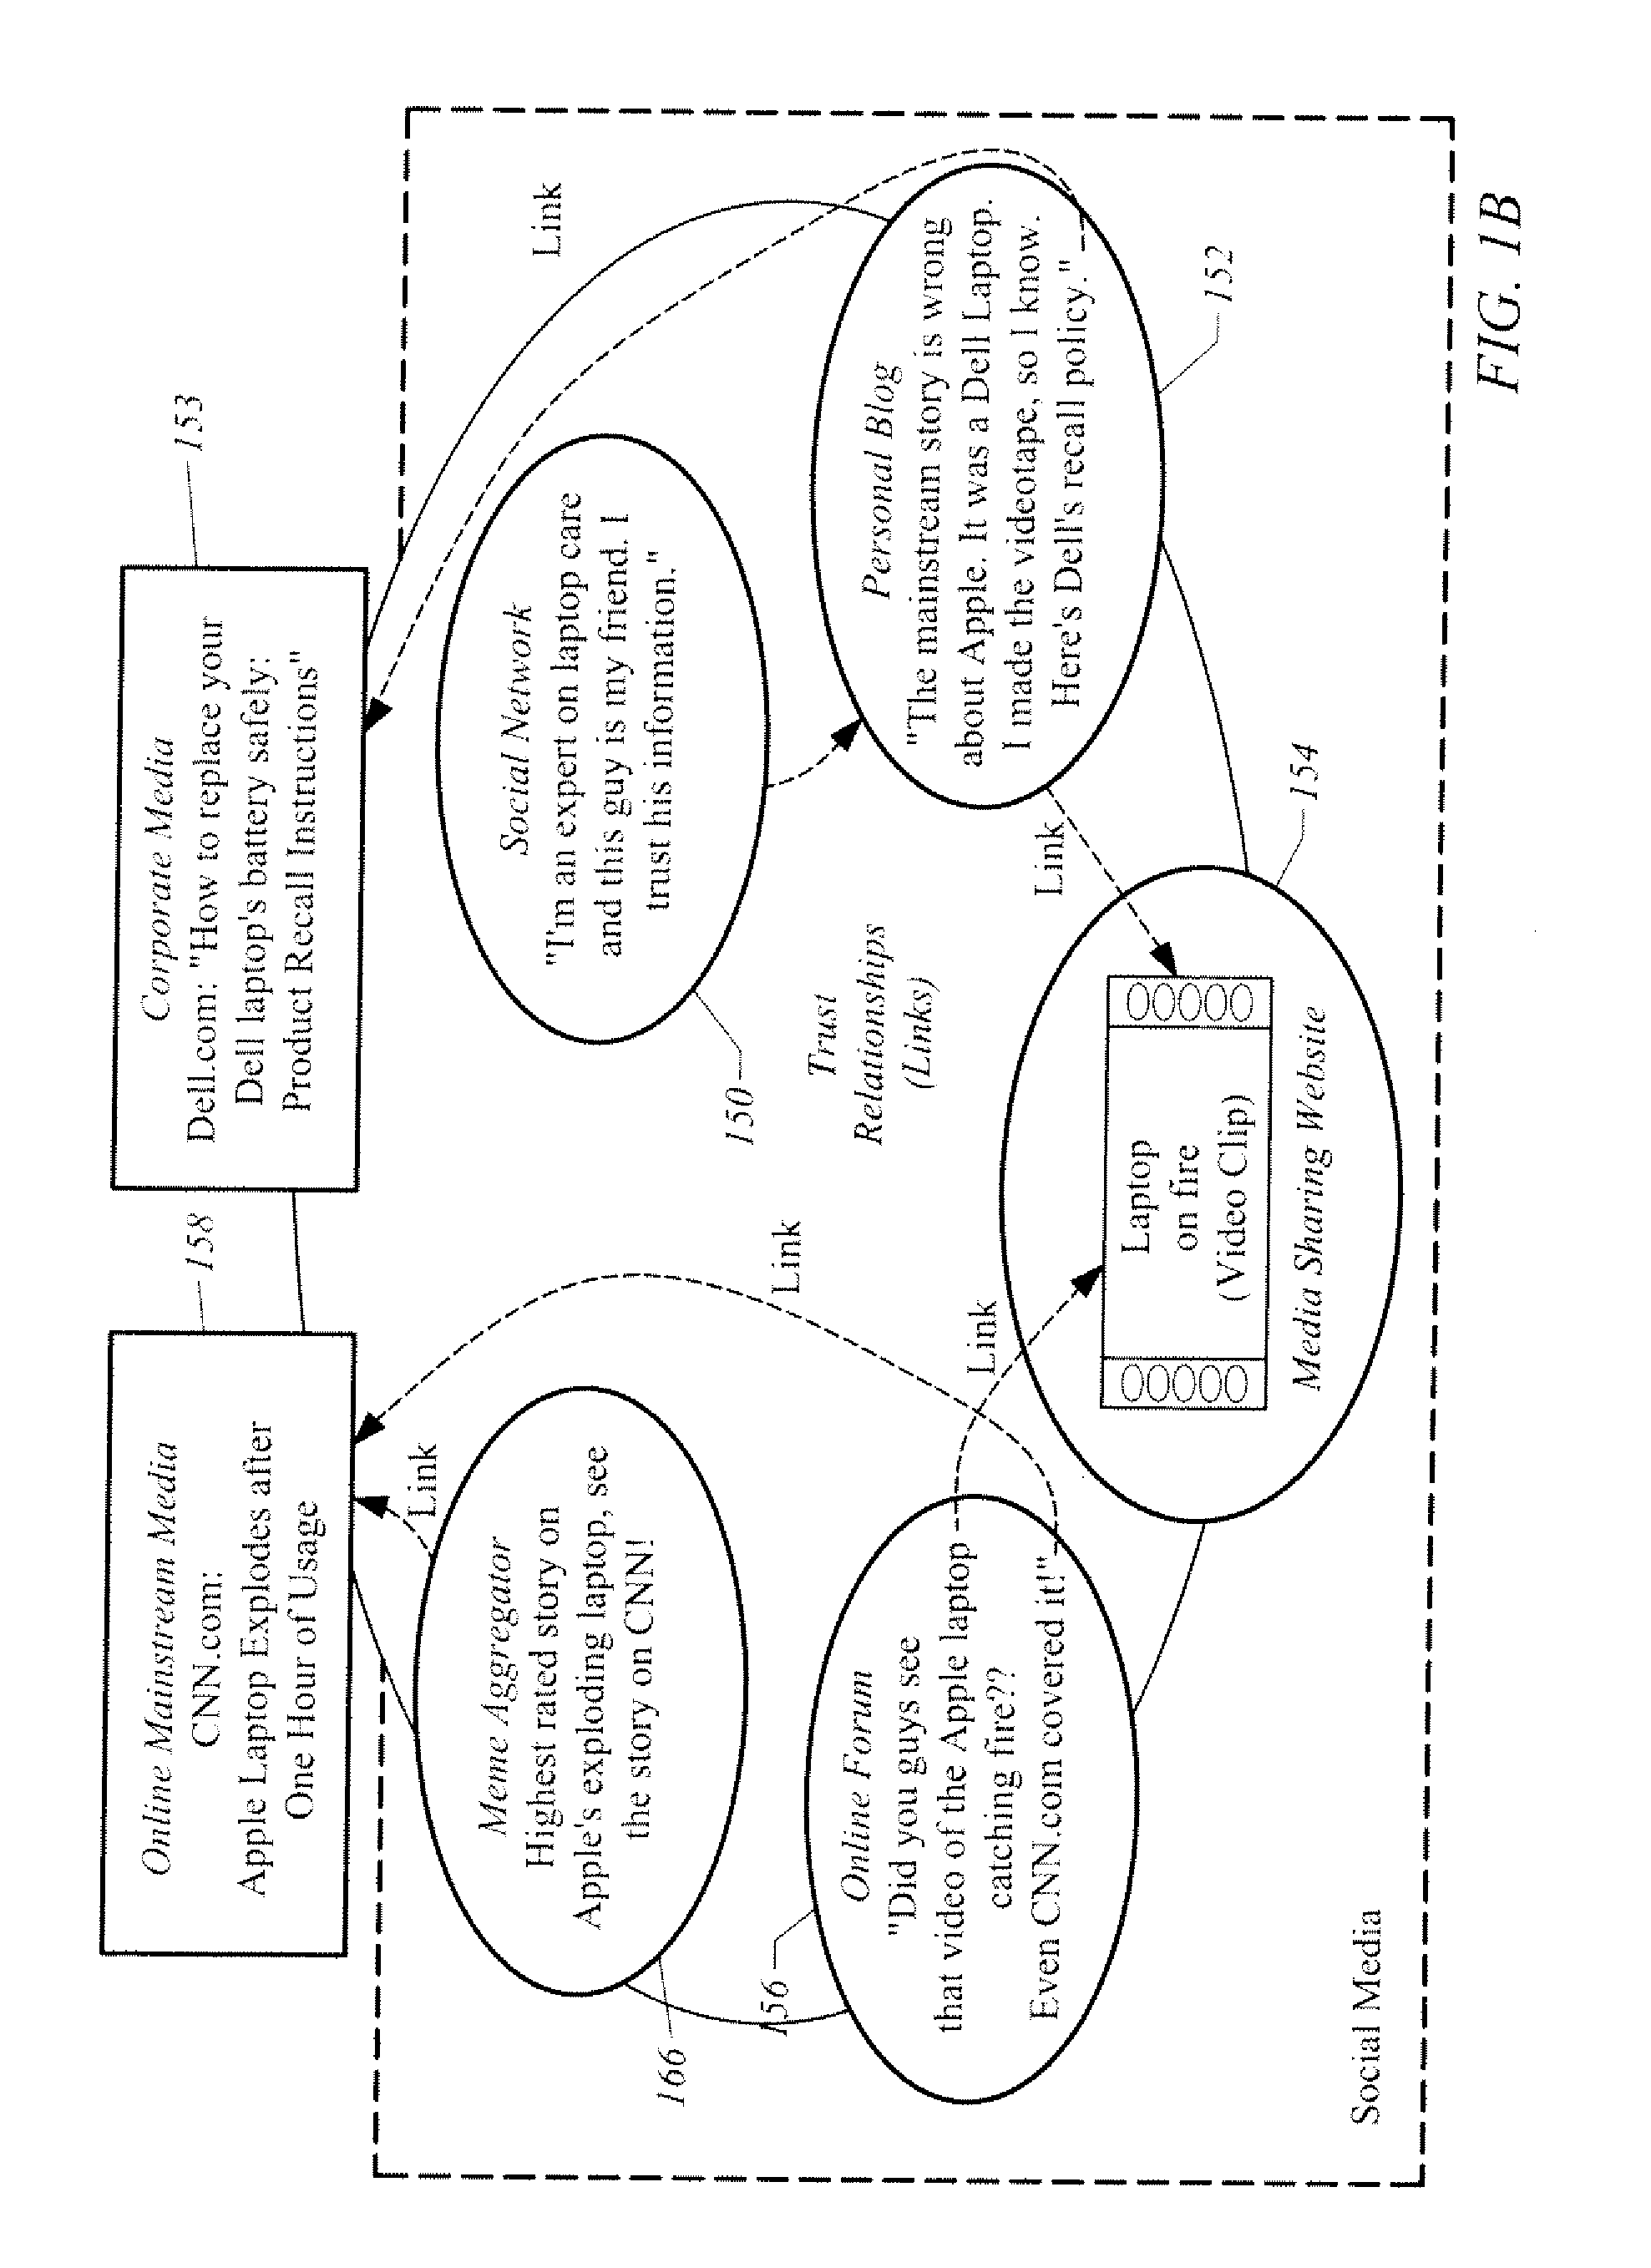 System and Method For Advertisement Targeting of Conversations in Social Media